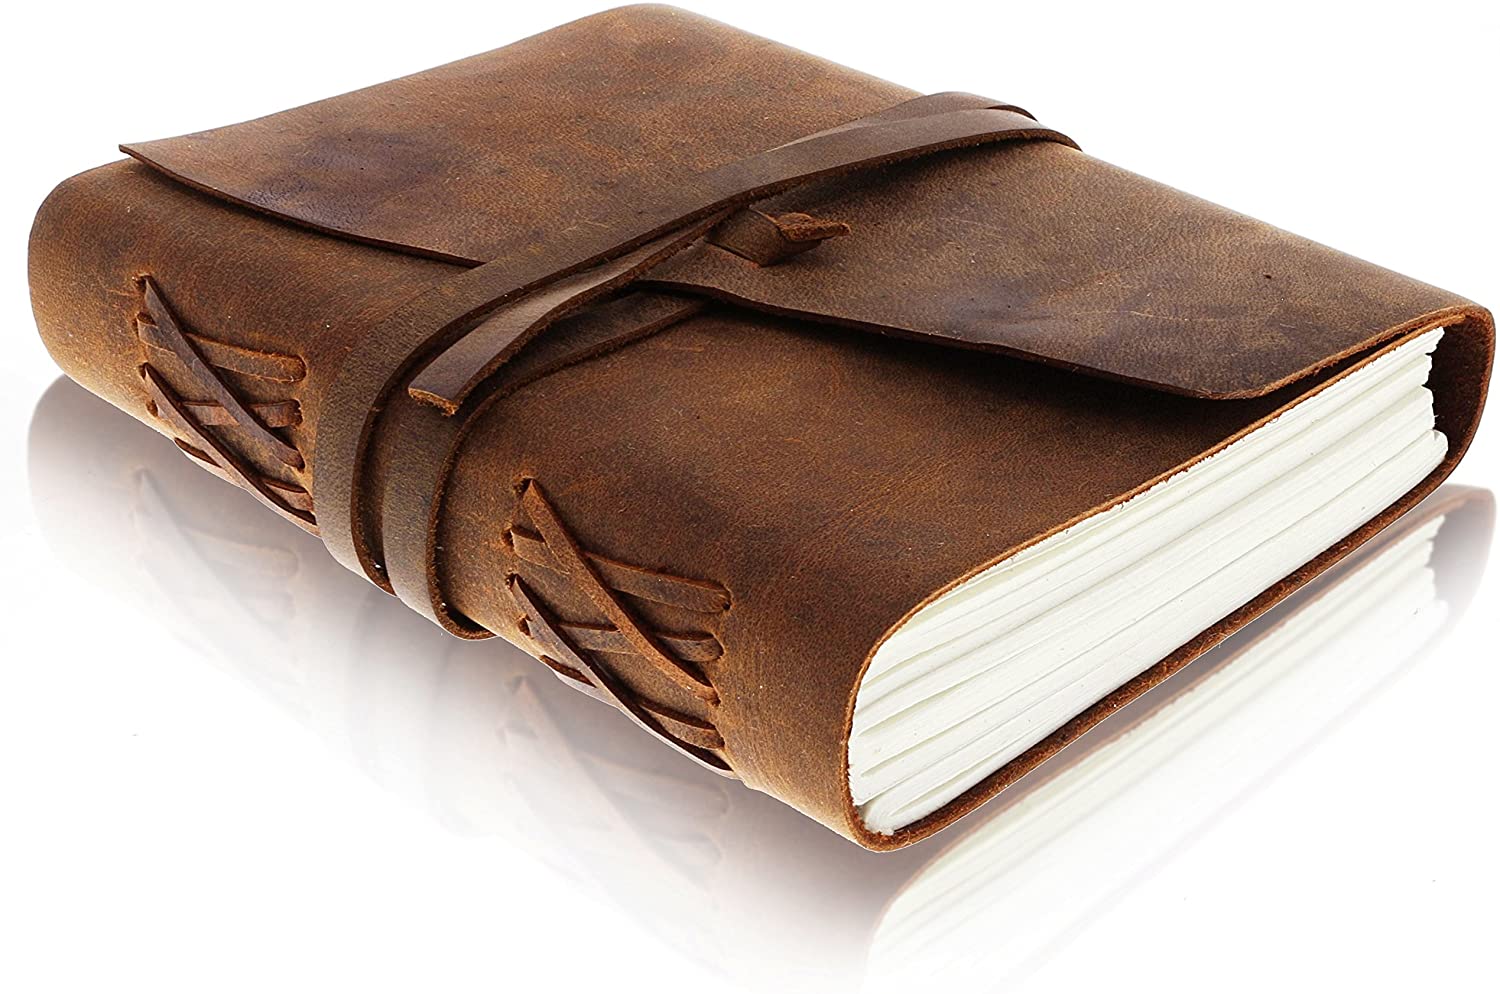 Leather Journal Writing Notebook - Antique Handmade Leather Bound Daily Notepad